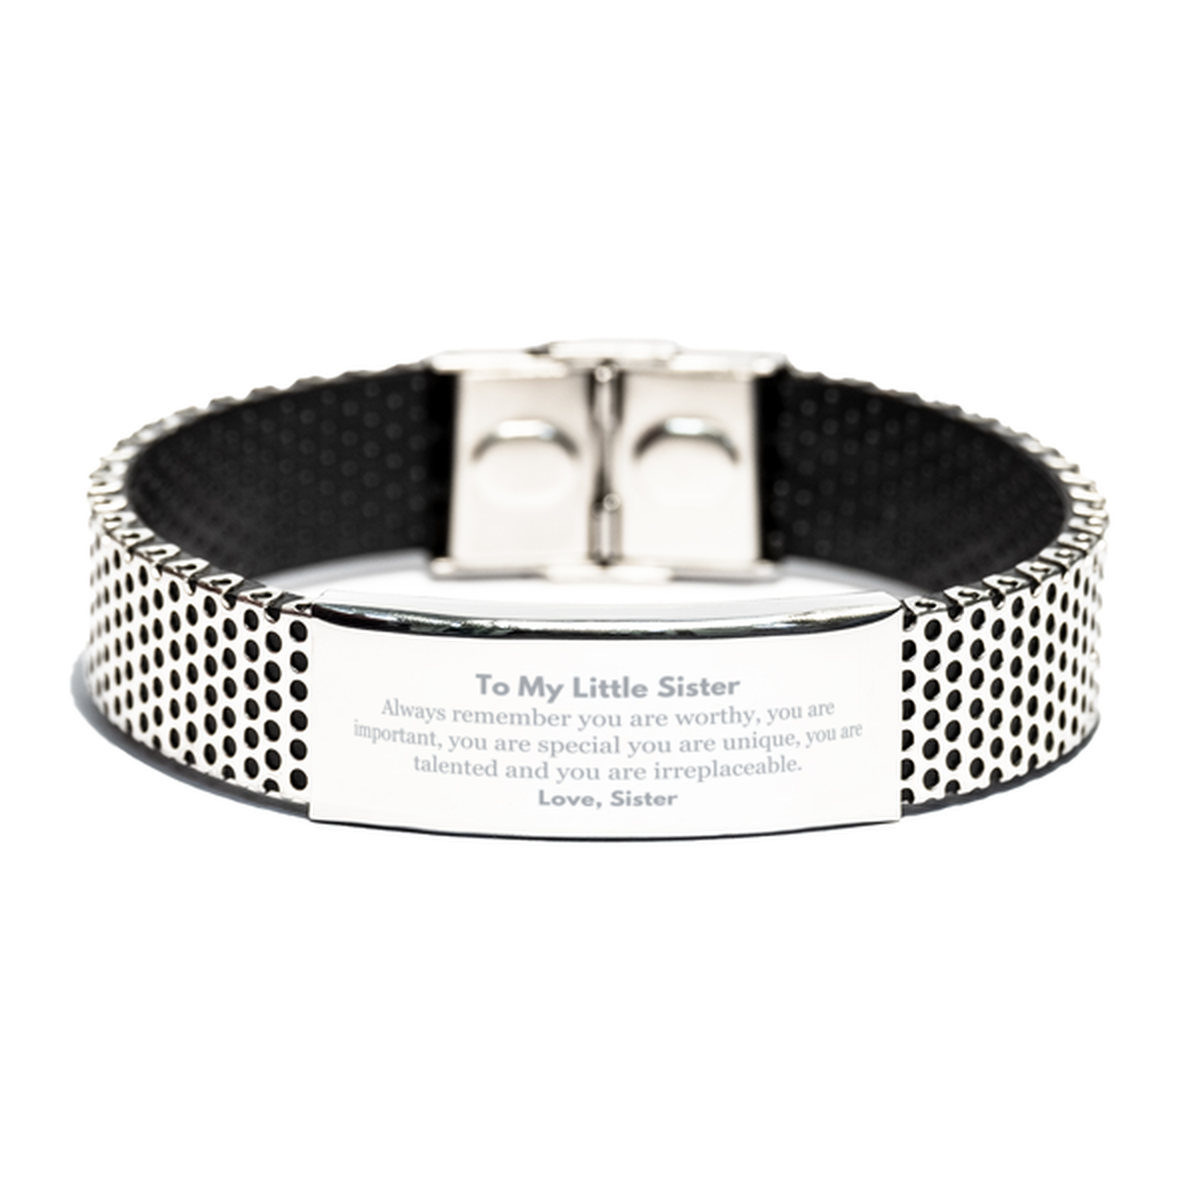 Little Sister Birthday Gifts from Sister, Inspirational Stainless Steel Bracelet for Little Sister Christmas Graduation Gifts for Little Sister Always remember you are worthy, you are important. Love, Sister